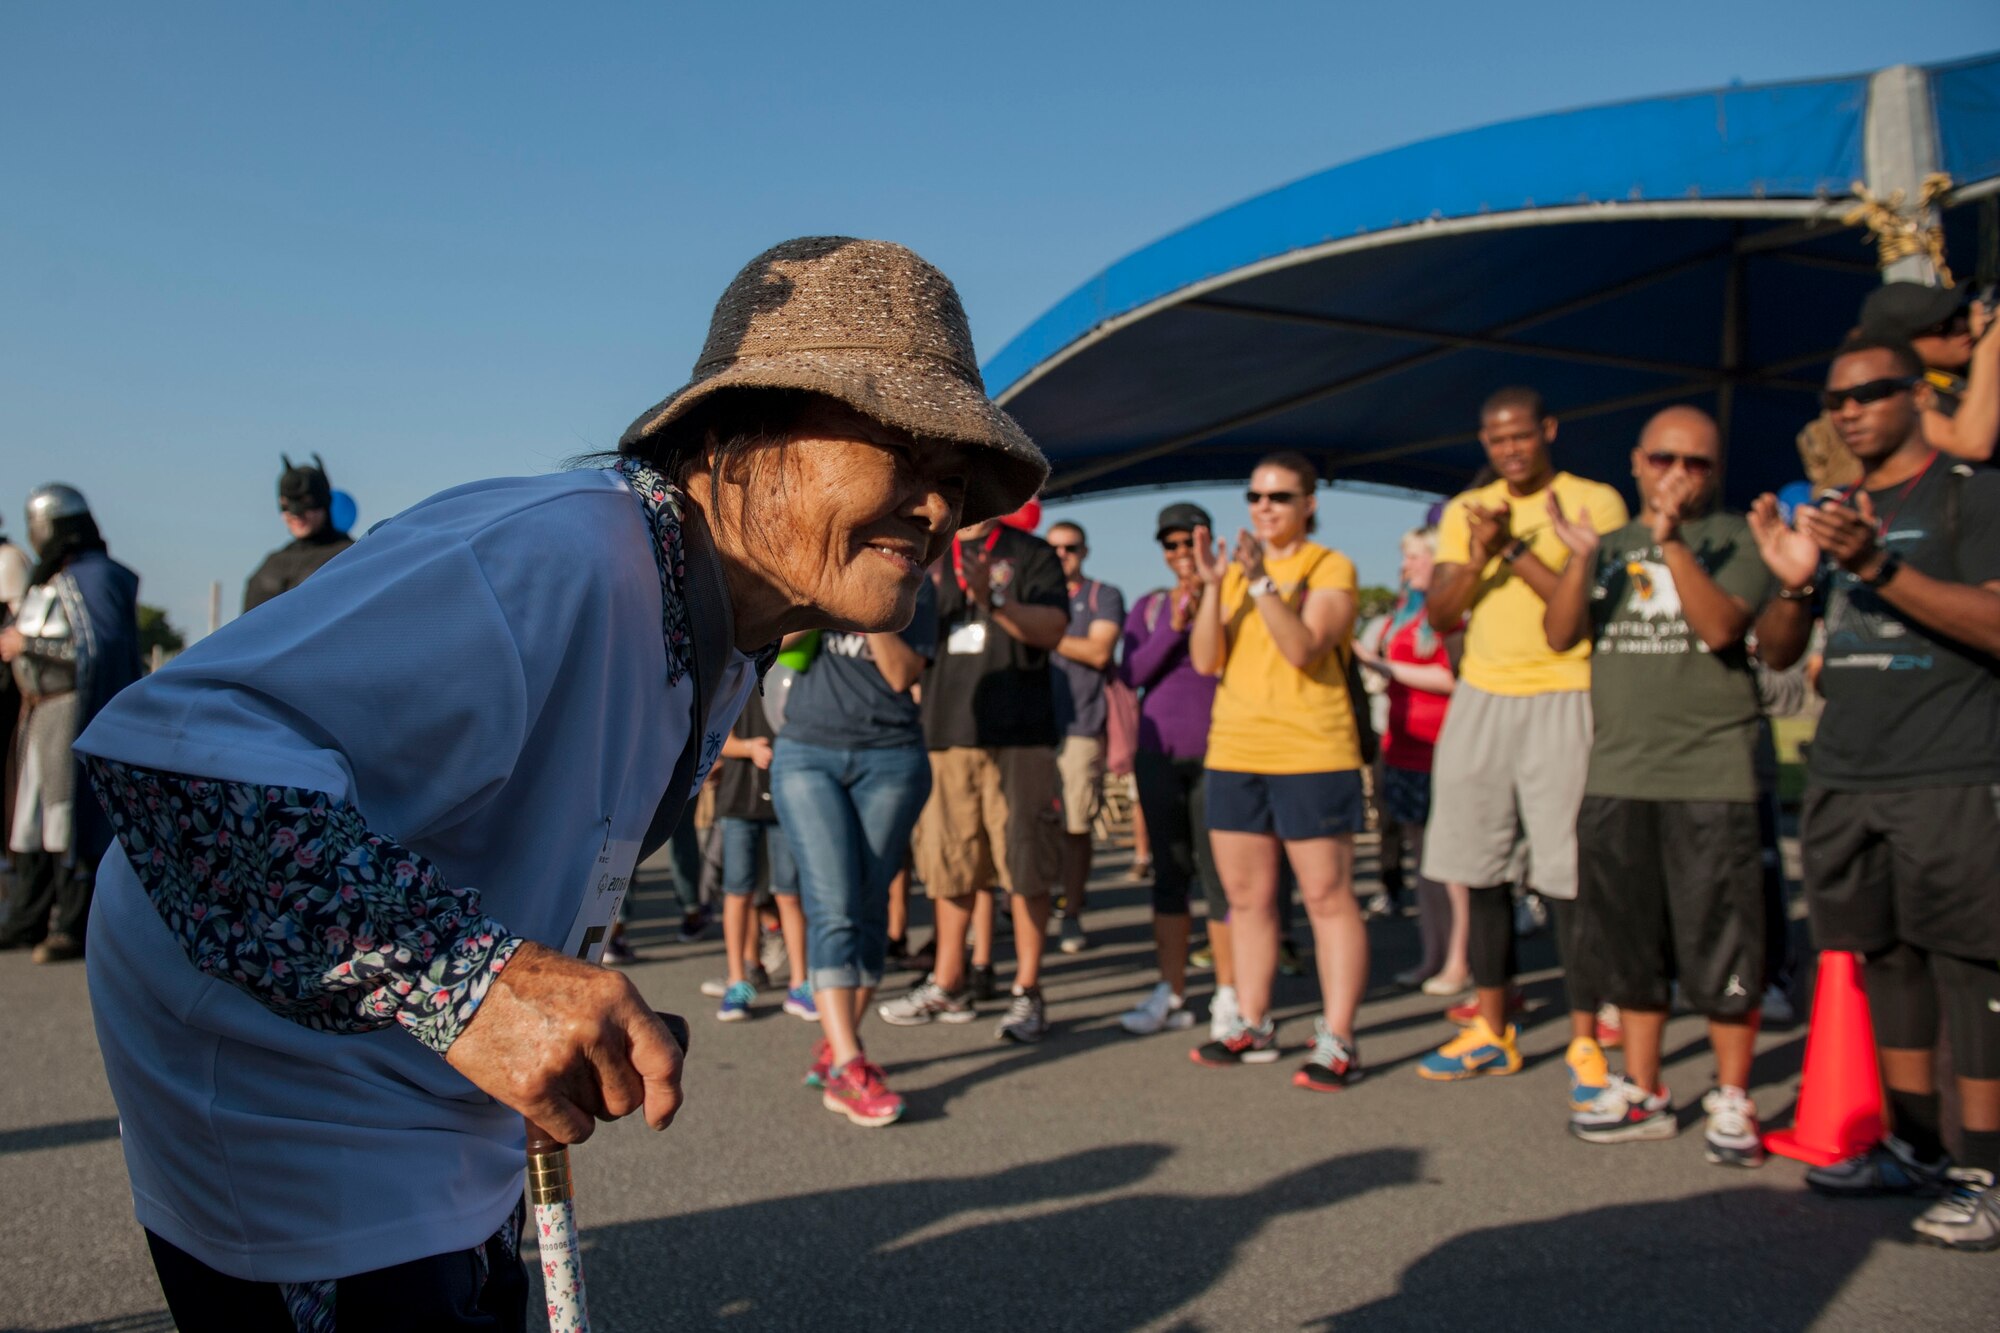 Eiko, a Kadena Special Olympics athlete, receives greetings and cheers from event volunteers during the athlete arrival event Nov. 5, 2016, at Kadena Air Base, Japan.  Approximately 1,000 American volunteers paired up with more than 500 local interpreters to support KSO athletes who ranged from six to 95 years of age. (U.S. Air Force photo by Senior Airman Peter Reft/Released)